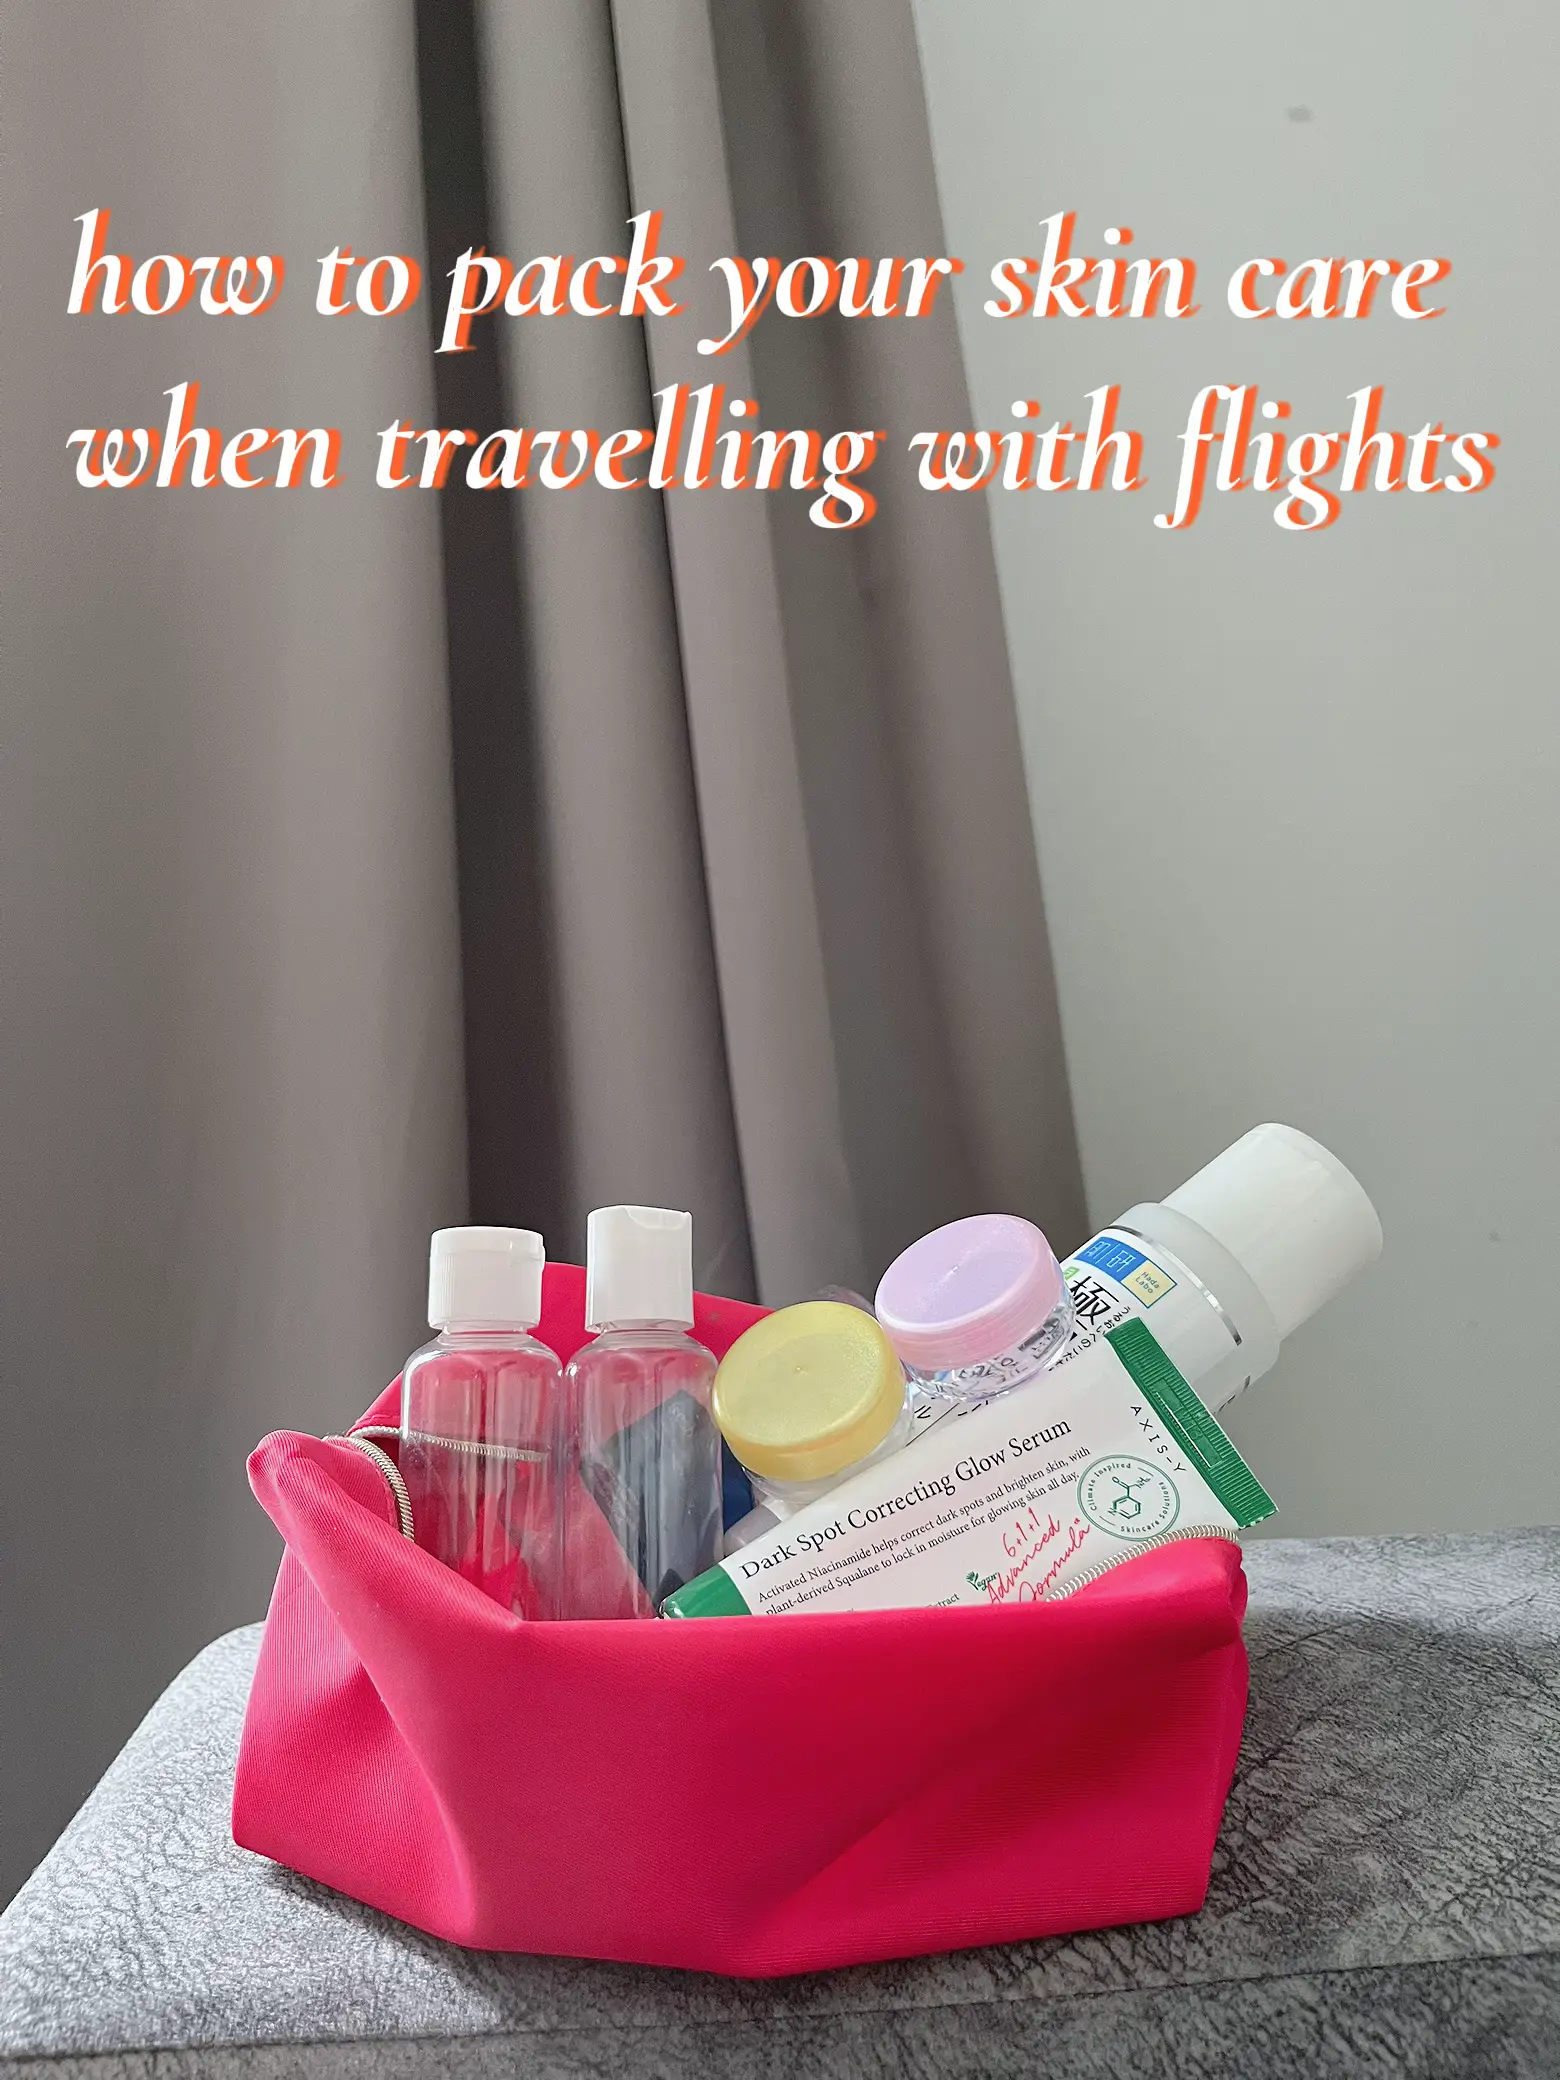 How to Pack Your Toiletries Like a Pro